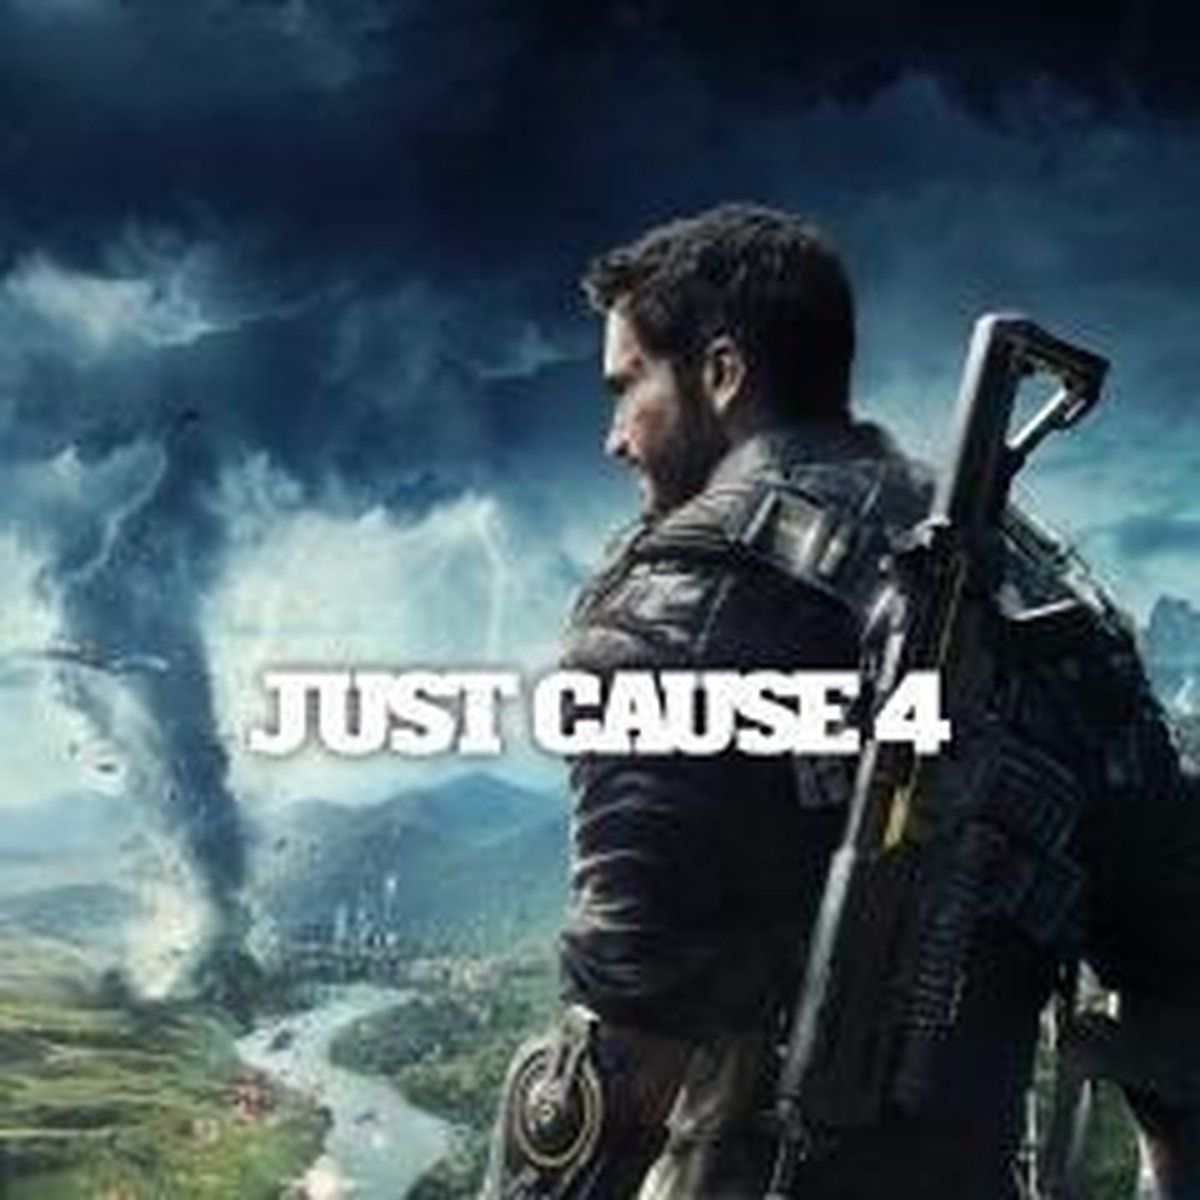 Just Cause 4 PlayStation 4